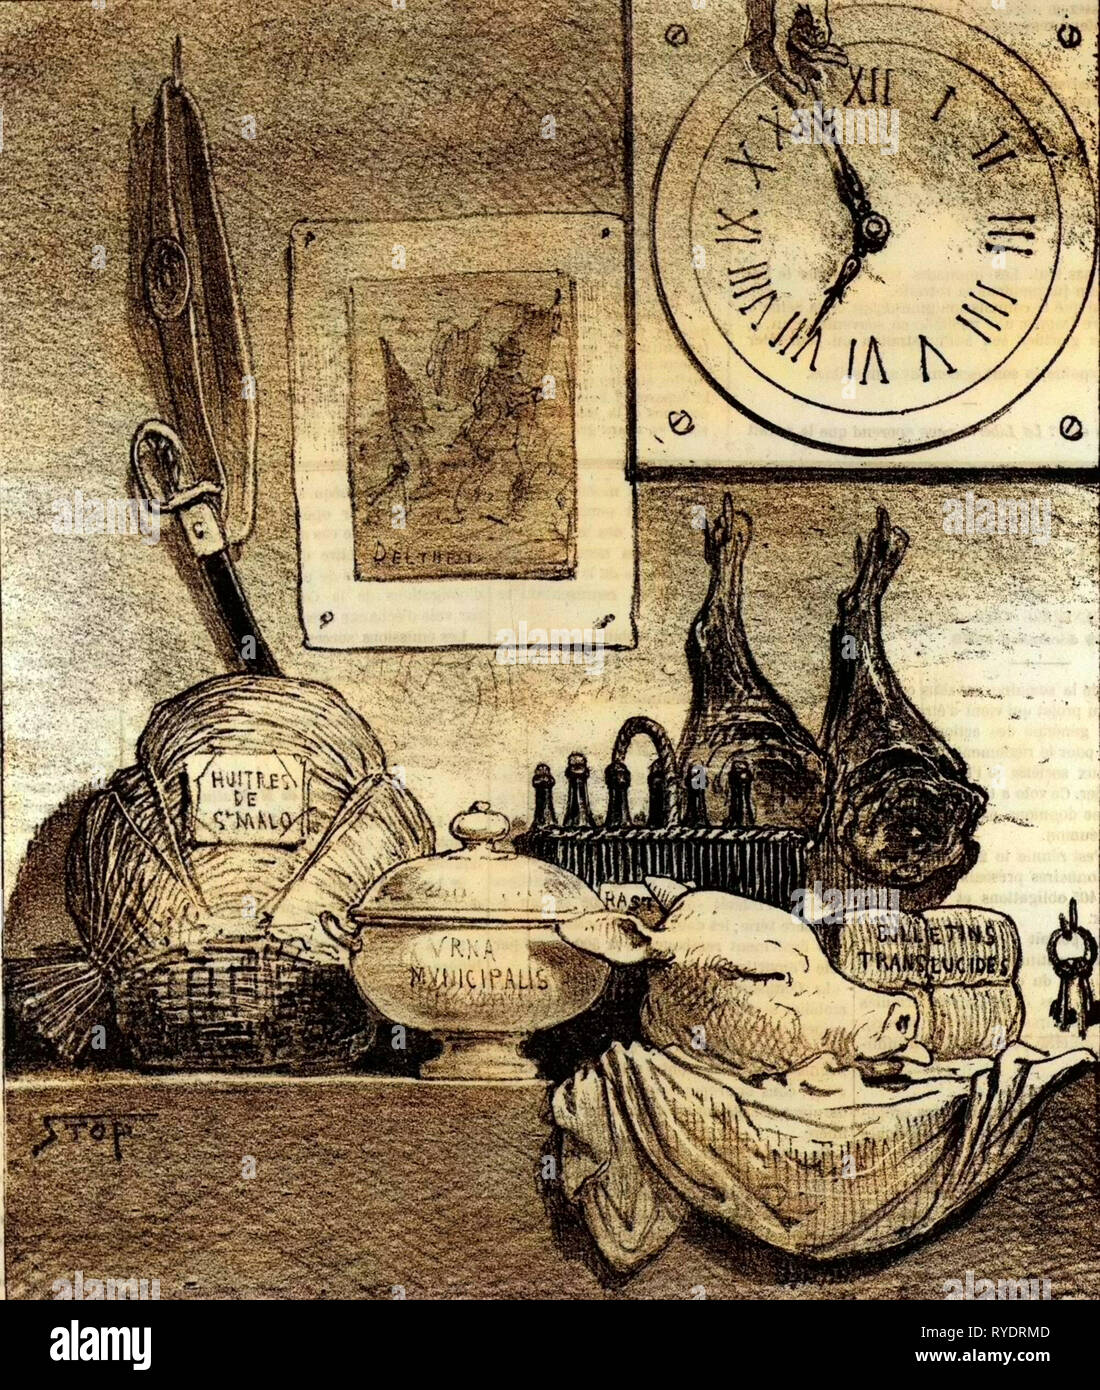 Food Shop in 19th Century France, Oysters of Saint Malo, Liszt Gourmet Archive, Food and Drink Stock Photo